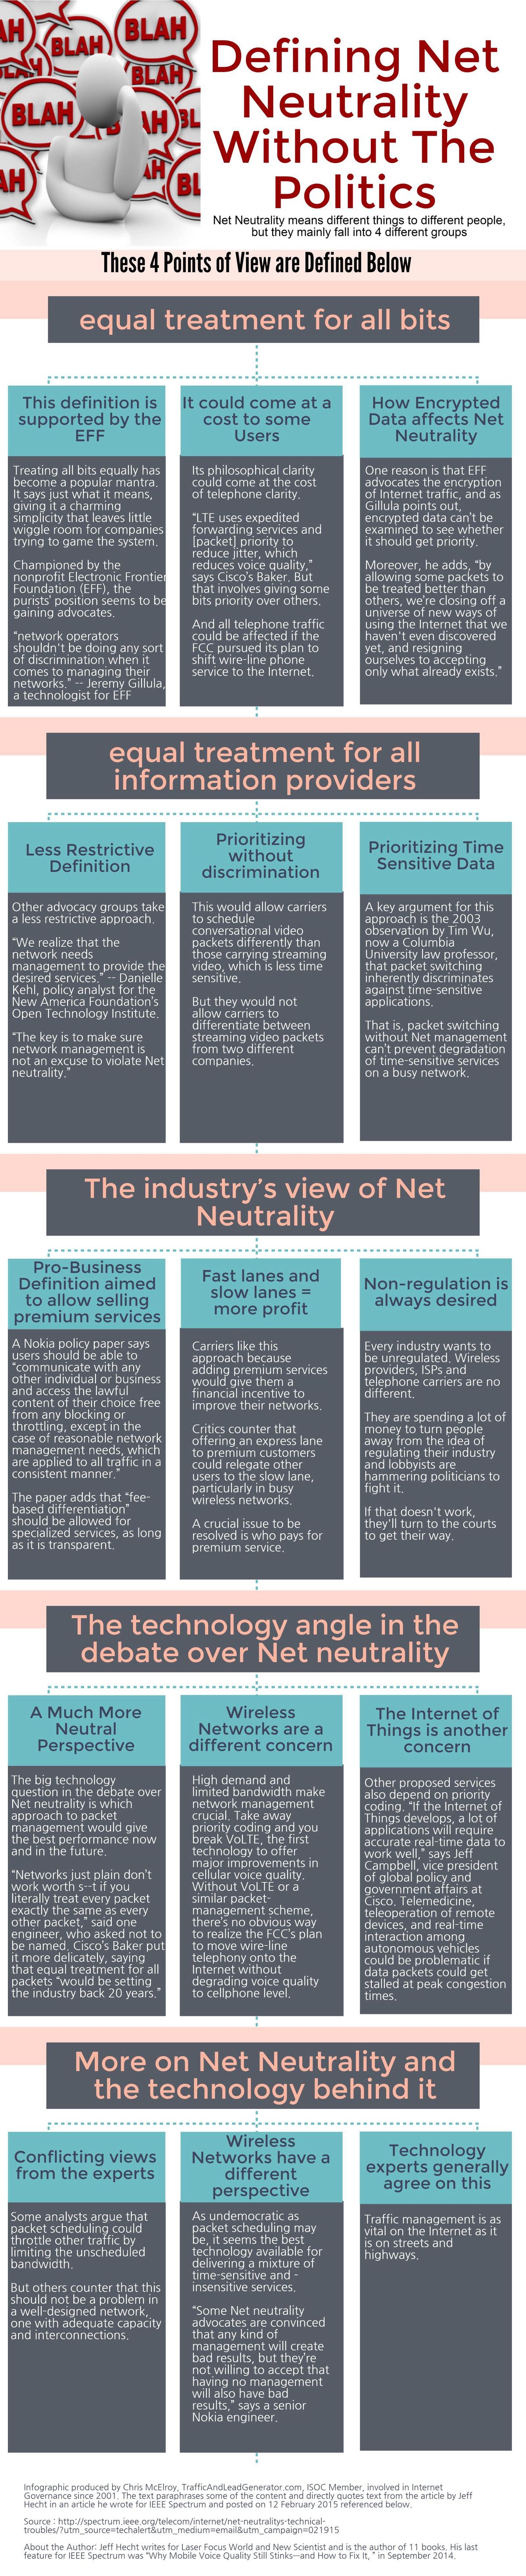 Infographic: Defining Net Neutrality Without the Politics